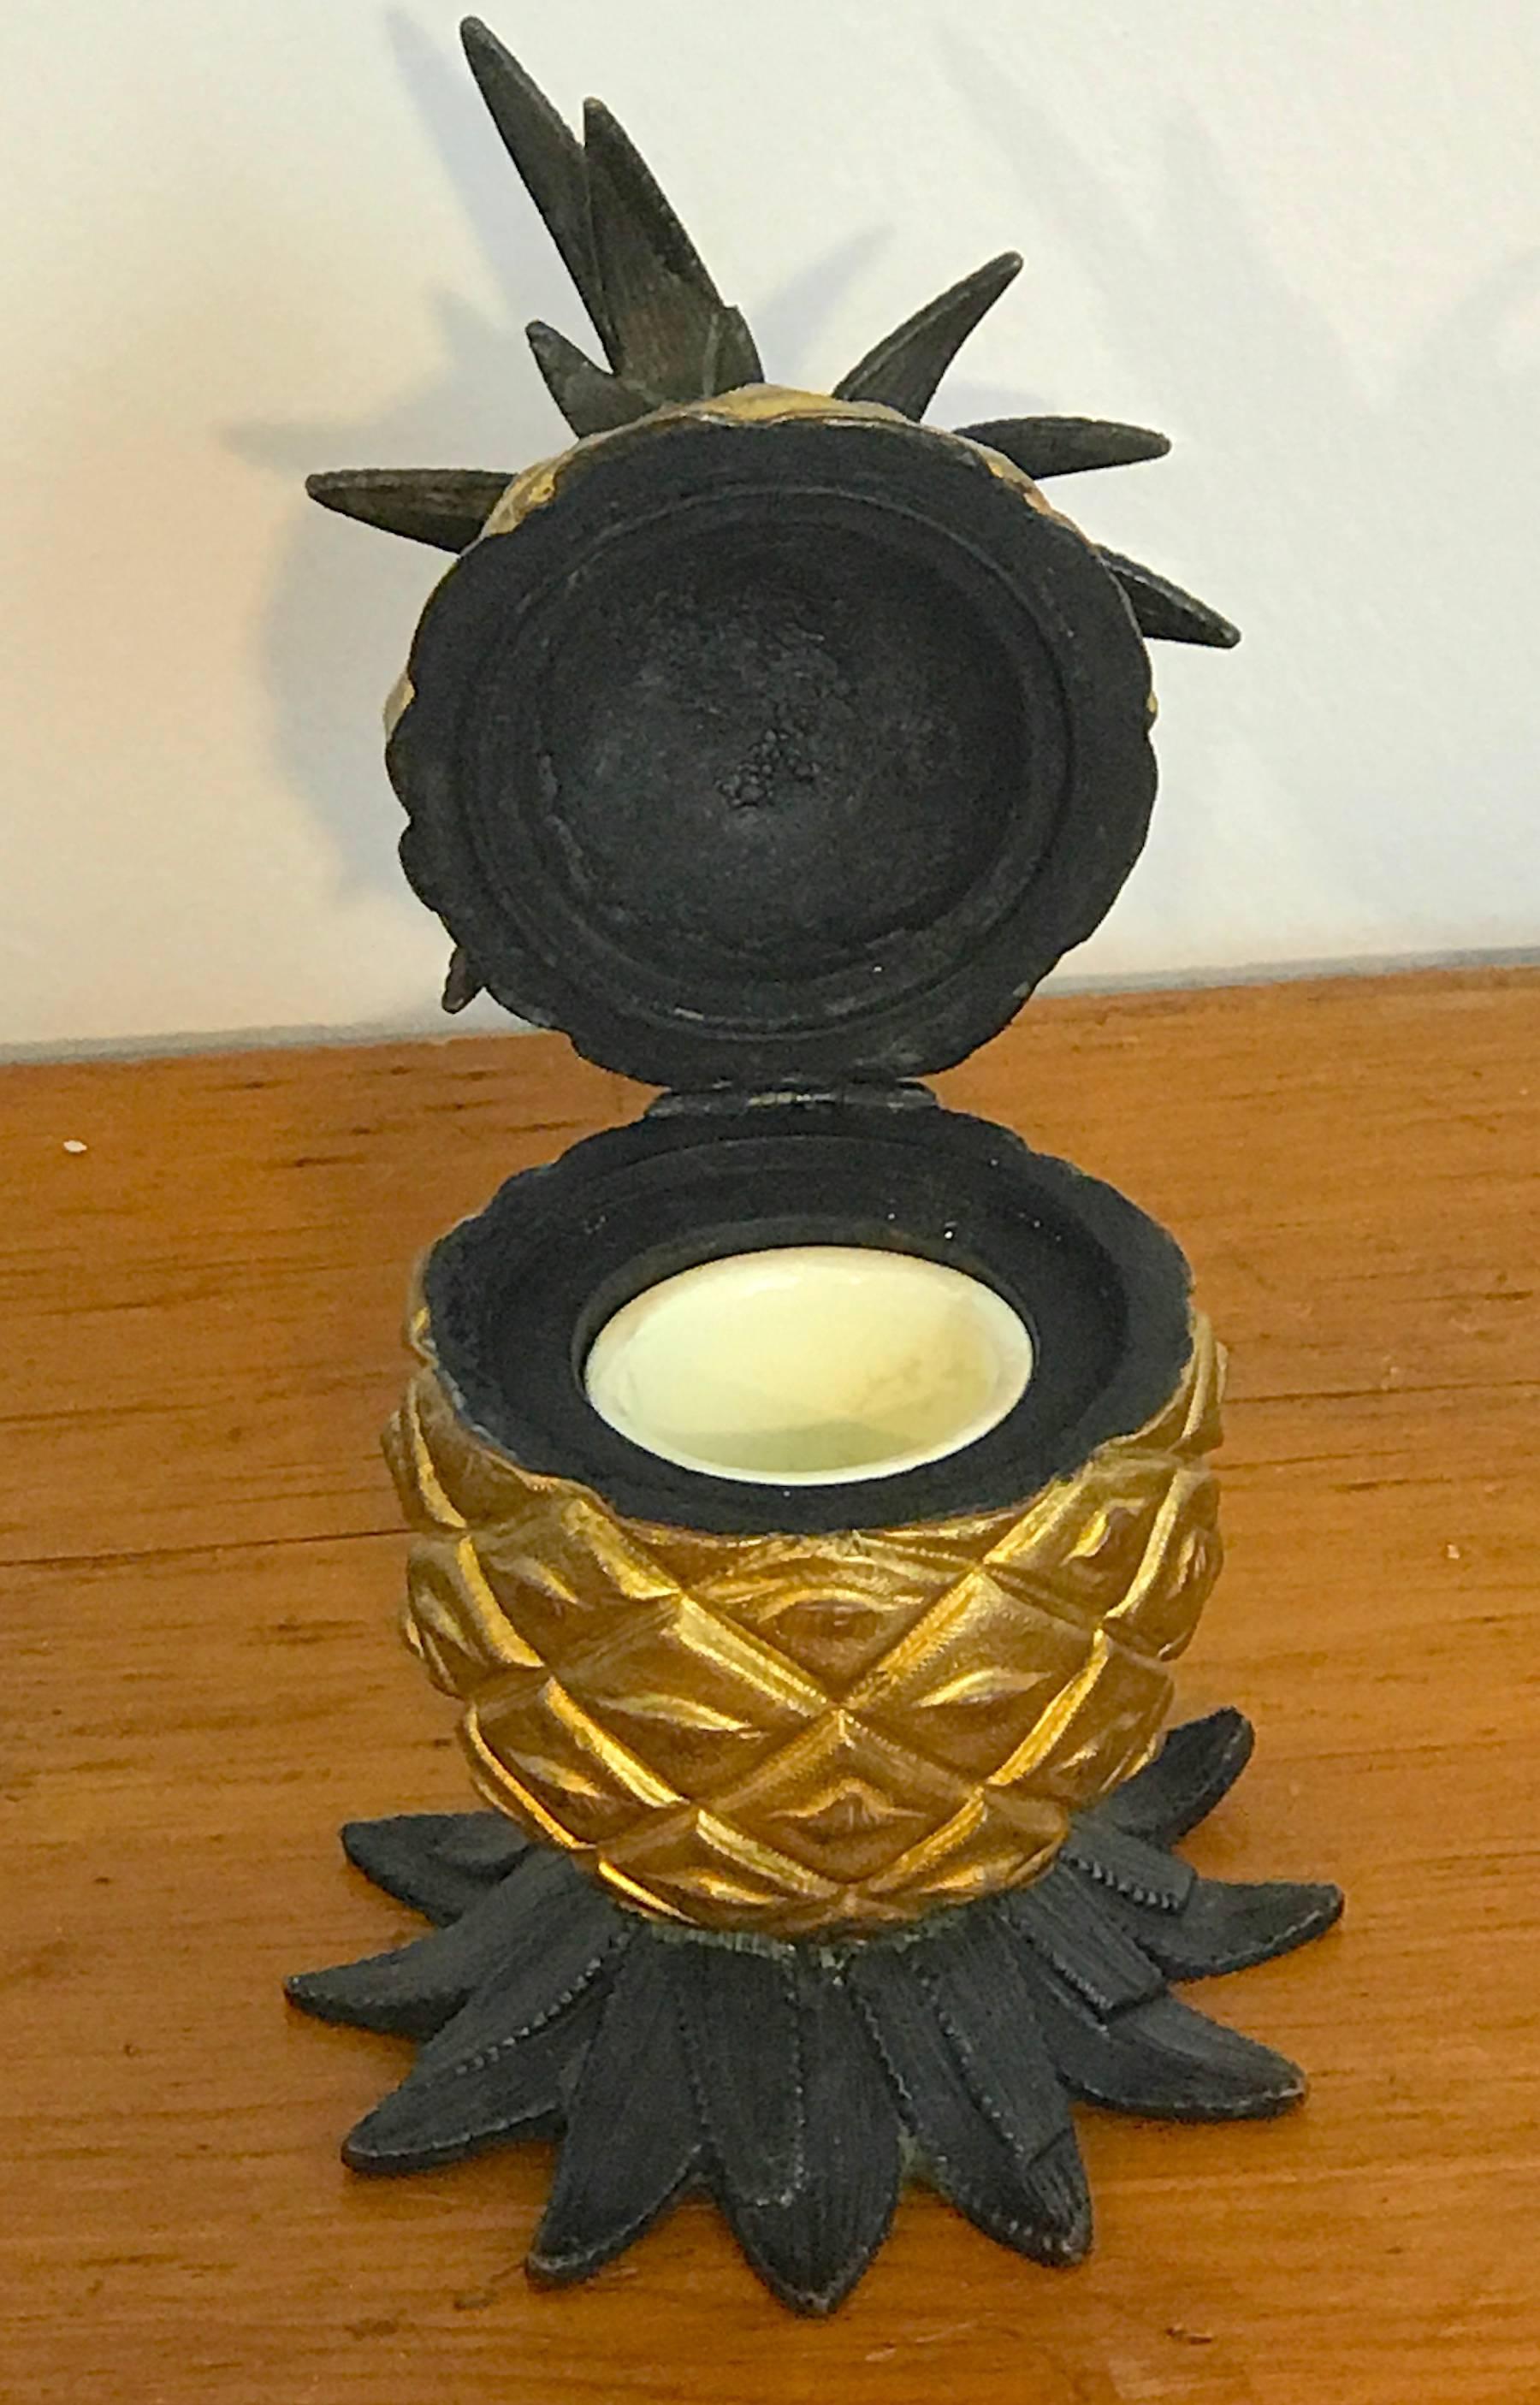 Vienna bronze cold painted pineapple inkwell with porcelain insert.